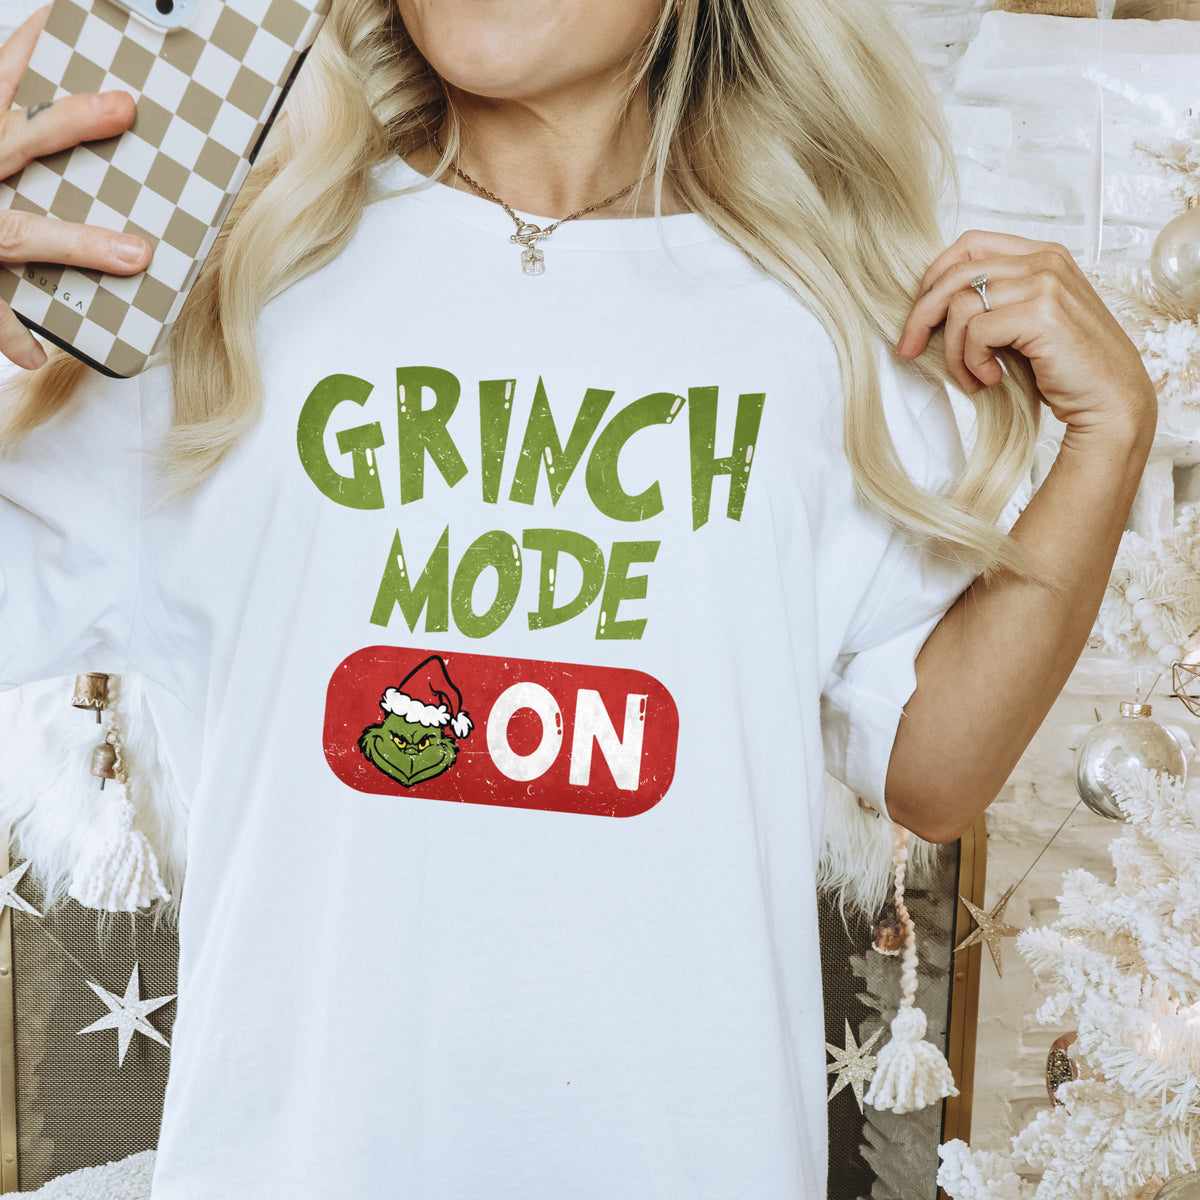 Grinch mode- ON